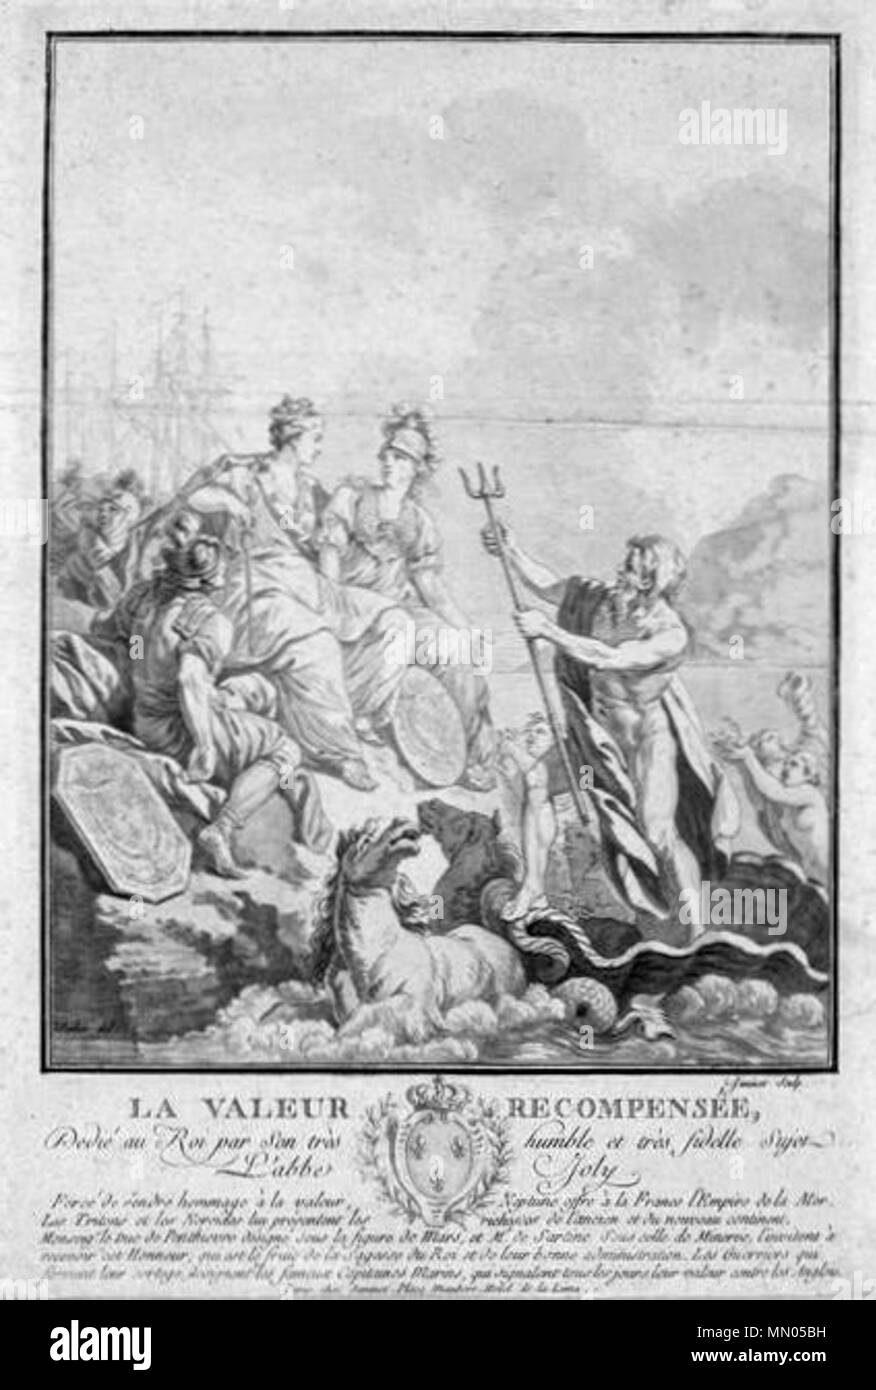 .  English: Print. 'Homage to the French Navy of the American war.' 'The value rewarded' (...) 'Forced to pay tribute to the value, Neptune gave France the empire of the sea ..' Drawing and allegorical commentary directed to acknowledge the efforts and victories of the French navy during the War of American Independence (1776-1783) and has regained its honor and power after defeats in the Seven Years War (1755 - 1763). Français : Estampe à l'eau forte. 'Hommage à la marine française de la guerre américaine.' 'La valeur récompensée' (...) 'Forcé de rendre hommage à la valeur, Neptune offre à la Stock Photo